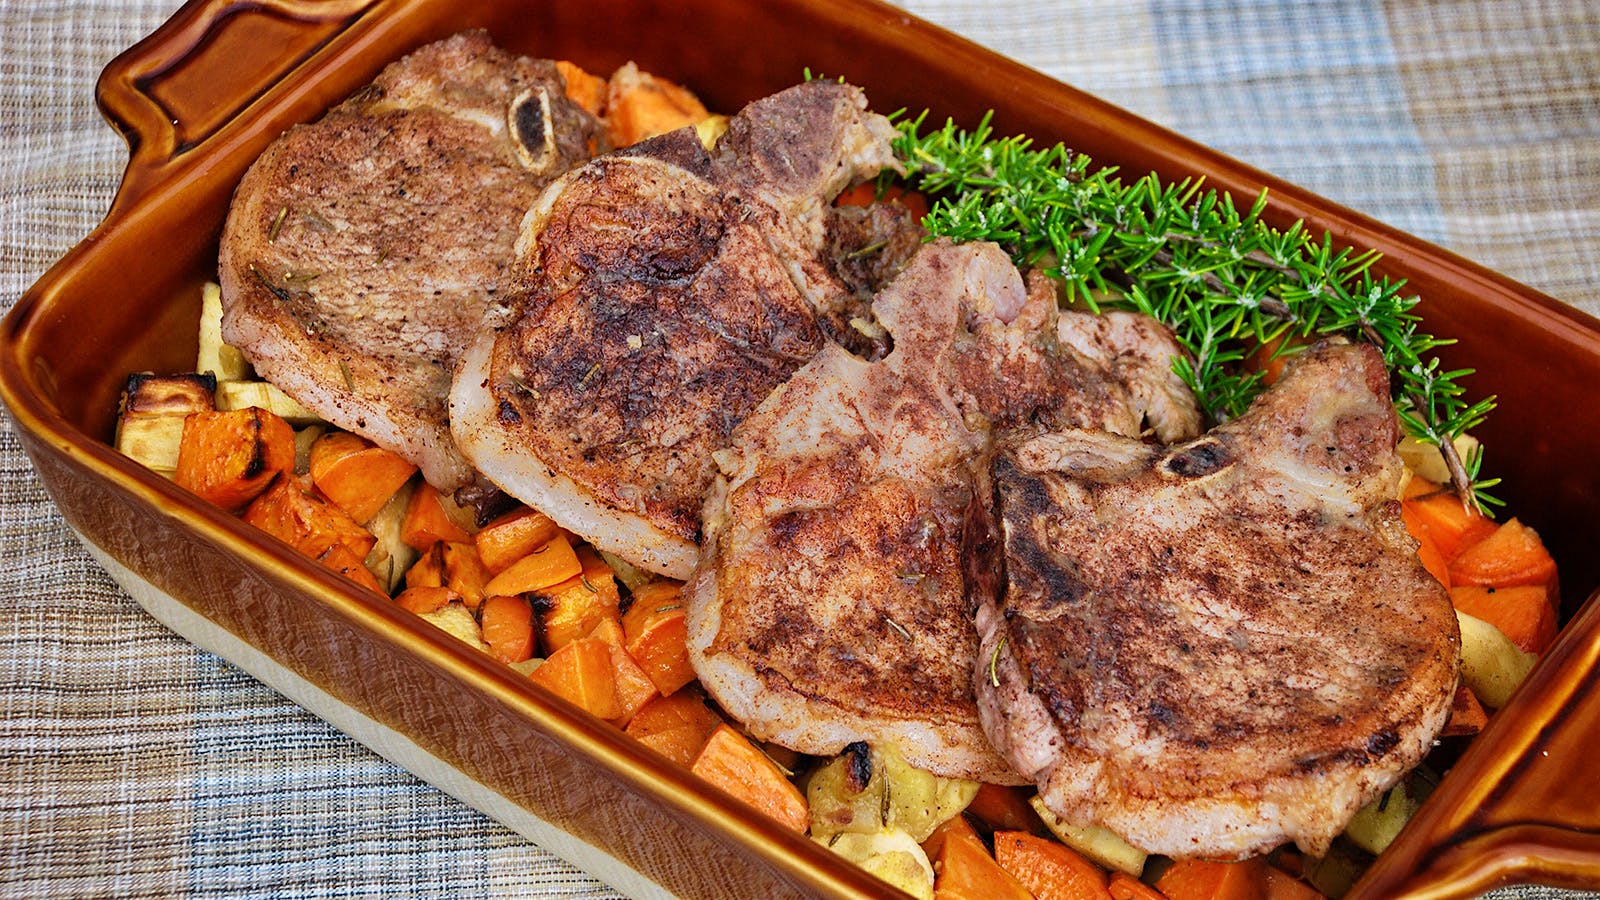 8 & $20: Pork Chops With Roasted Apples and Root Vegetables